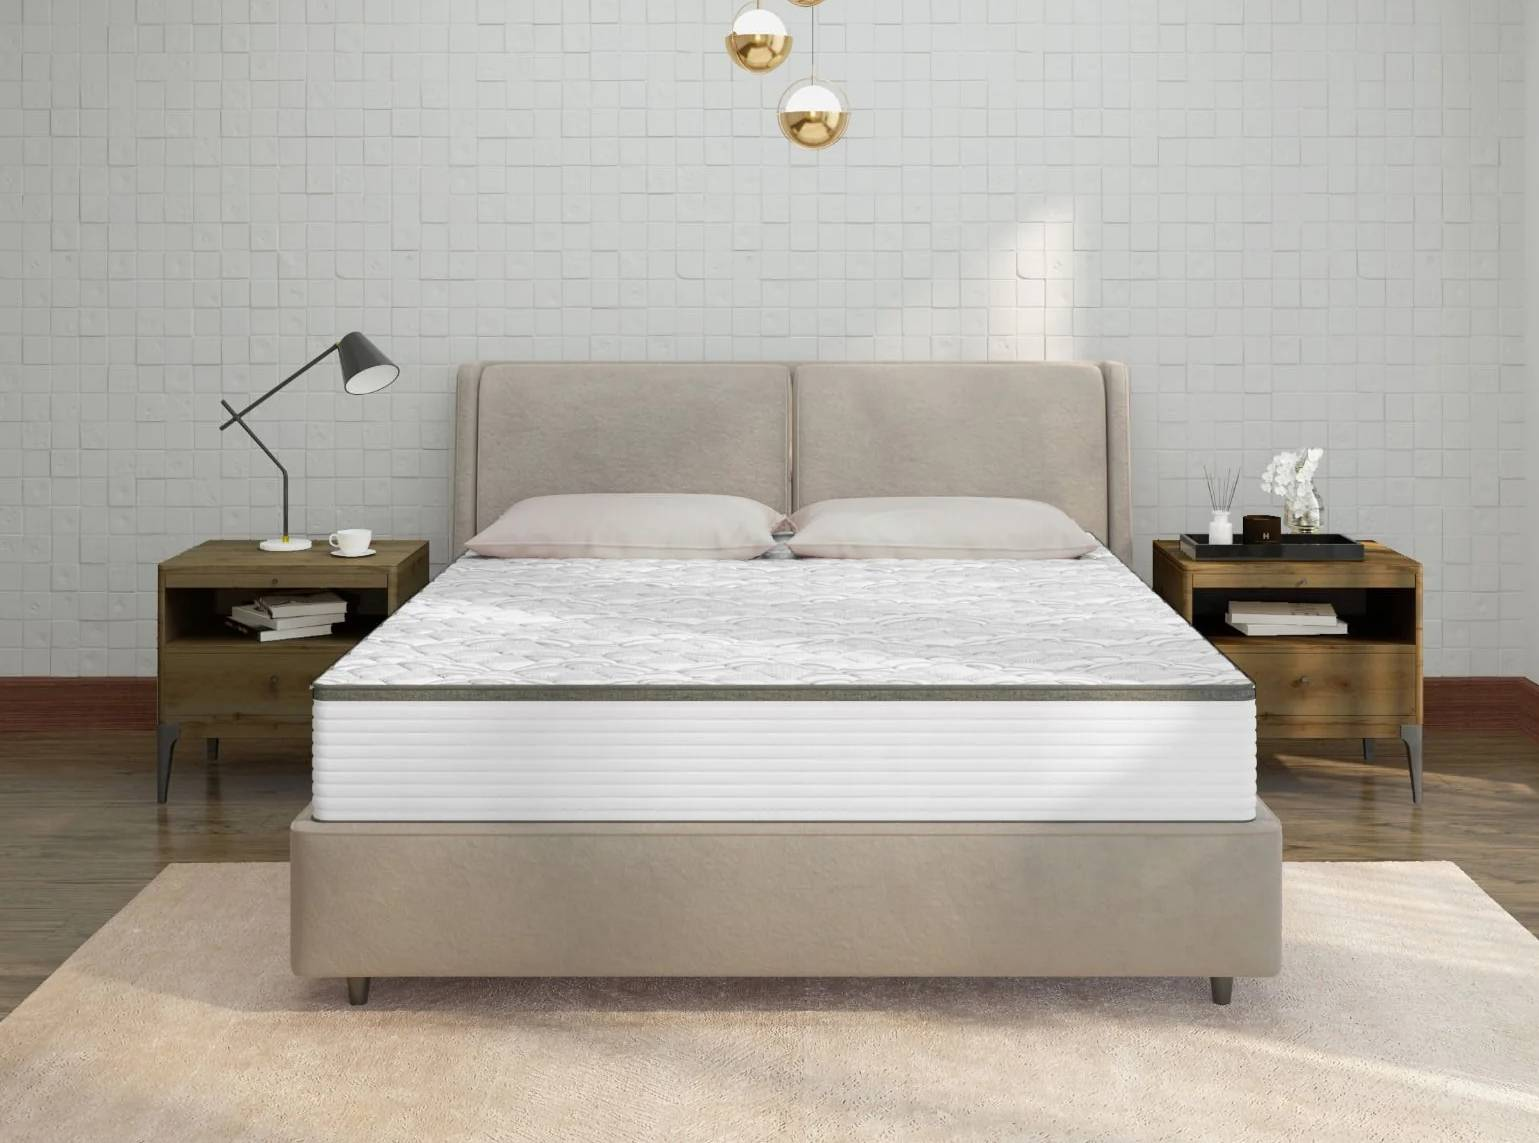 Does a Memory Foam Mattress Need a Box Spring? bunkie board, solid surface